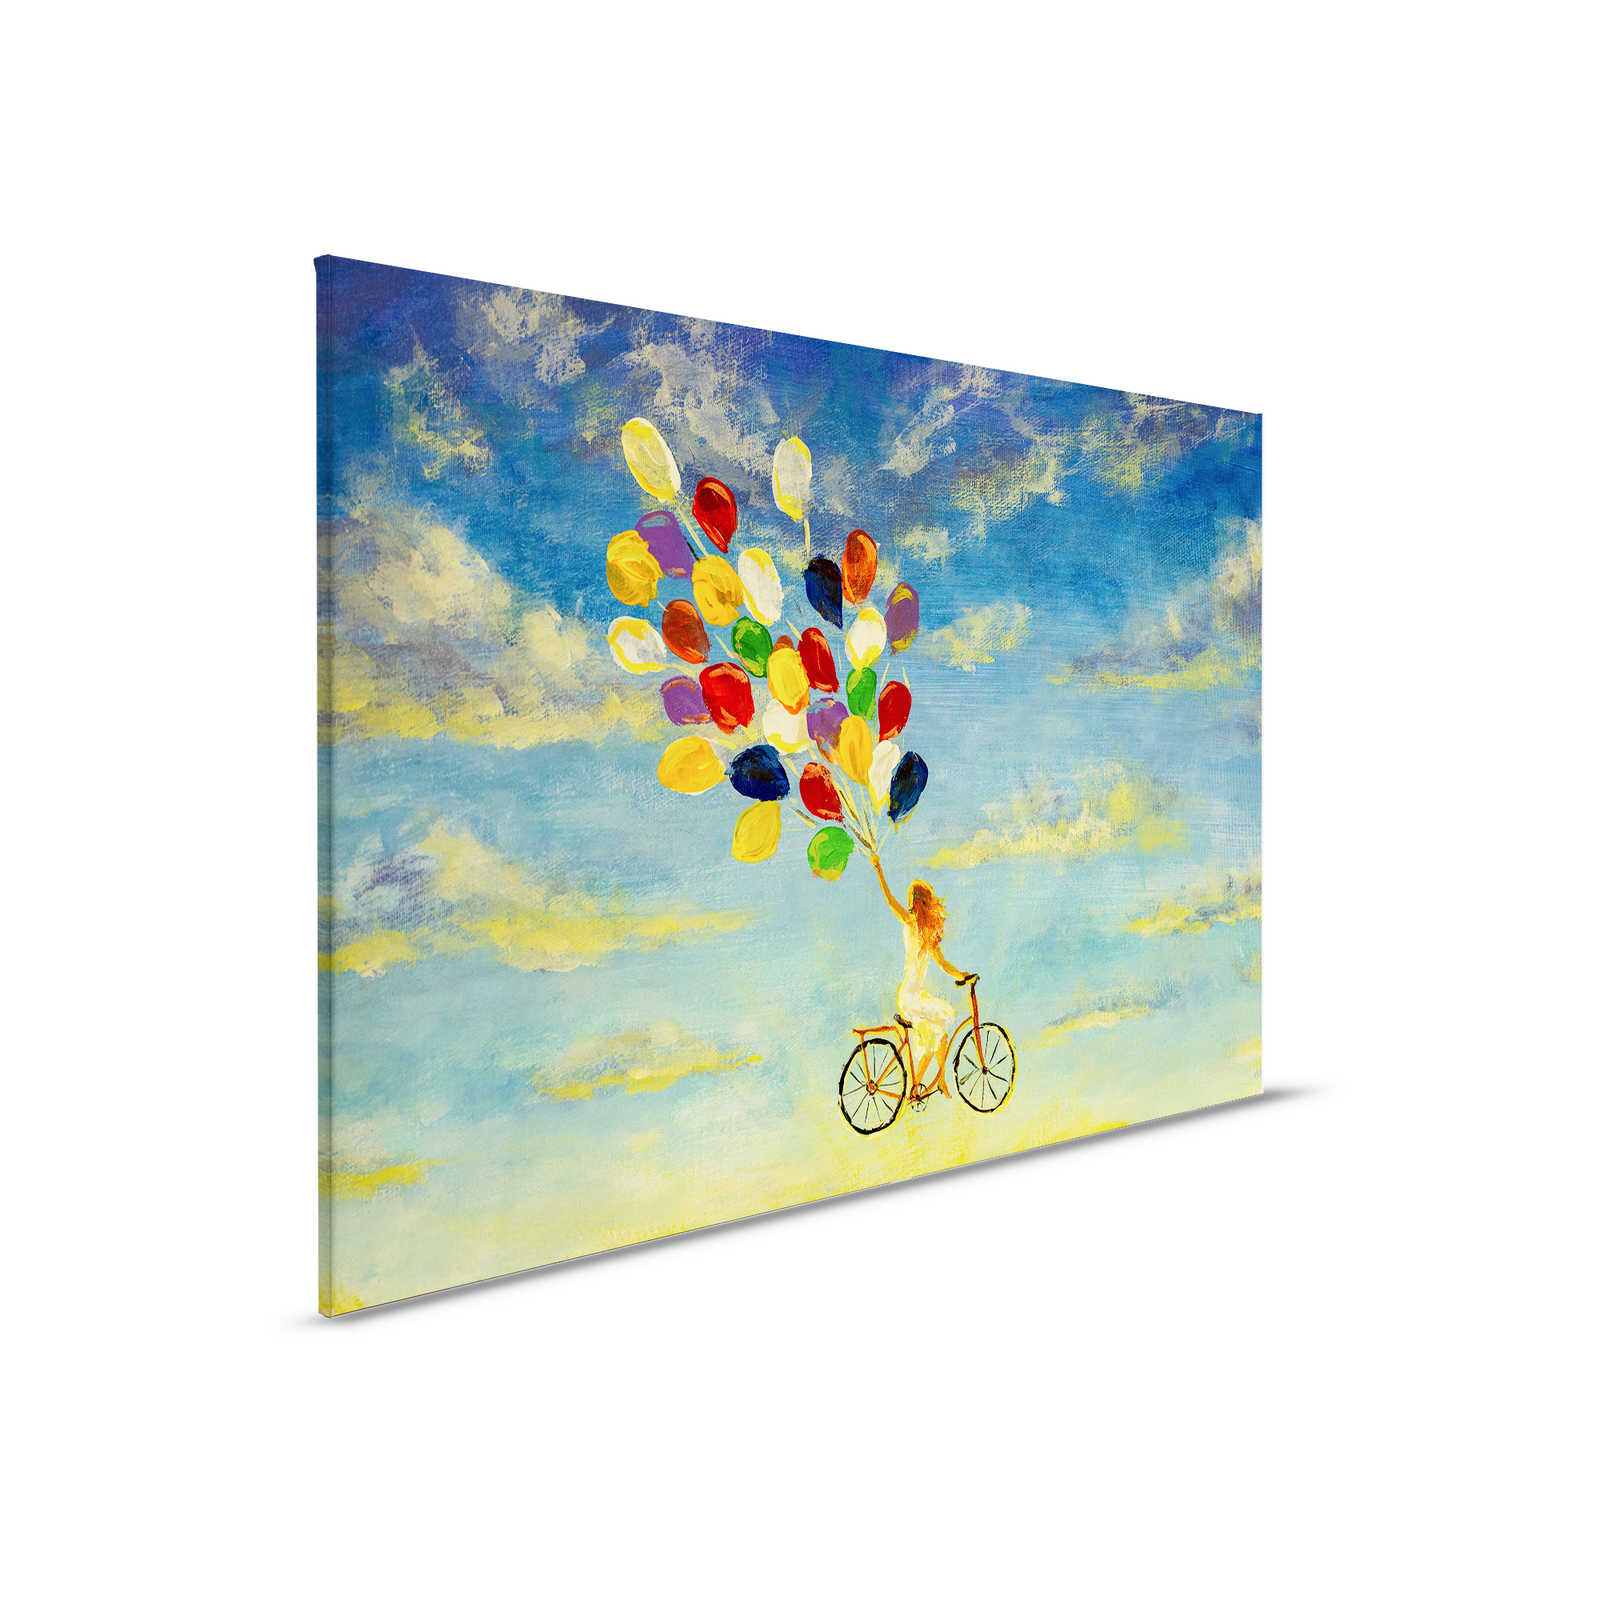         Canvas painting with Woman on Bicycle in the Sky Painting - 0.90 m x 0.60 m
    